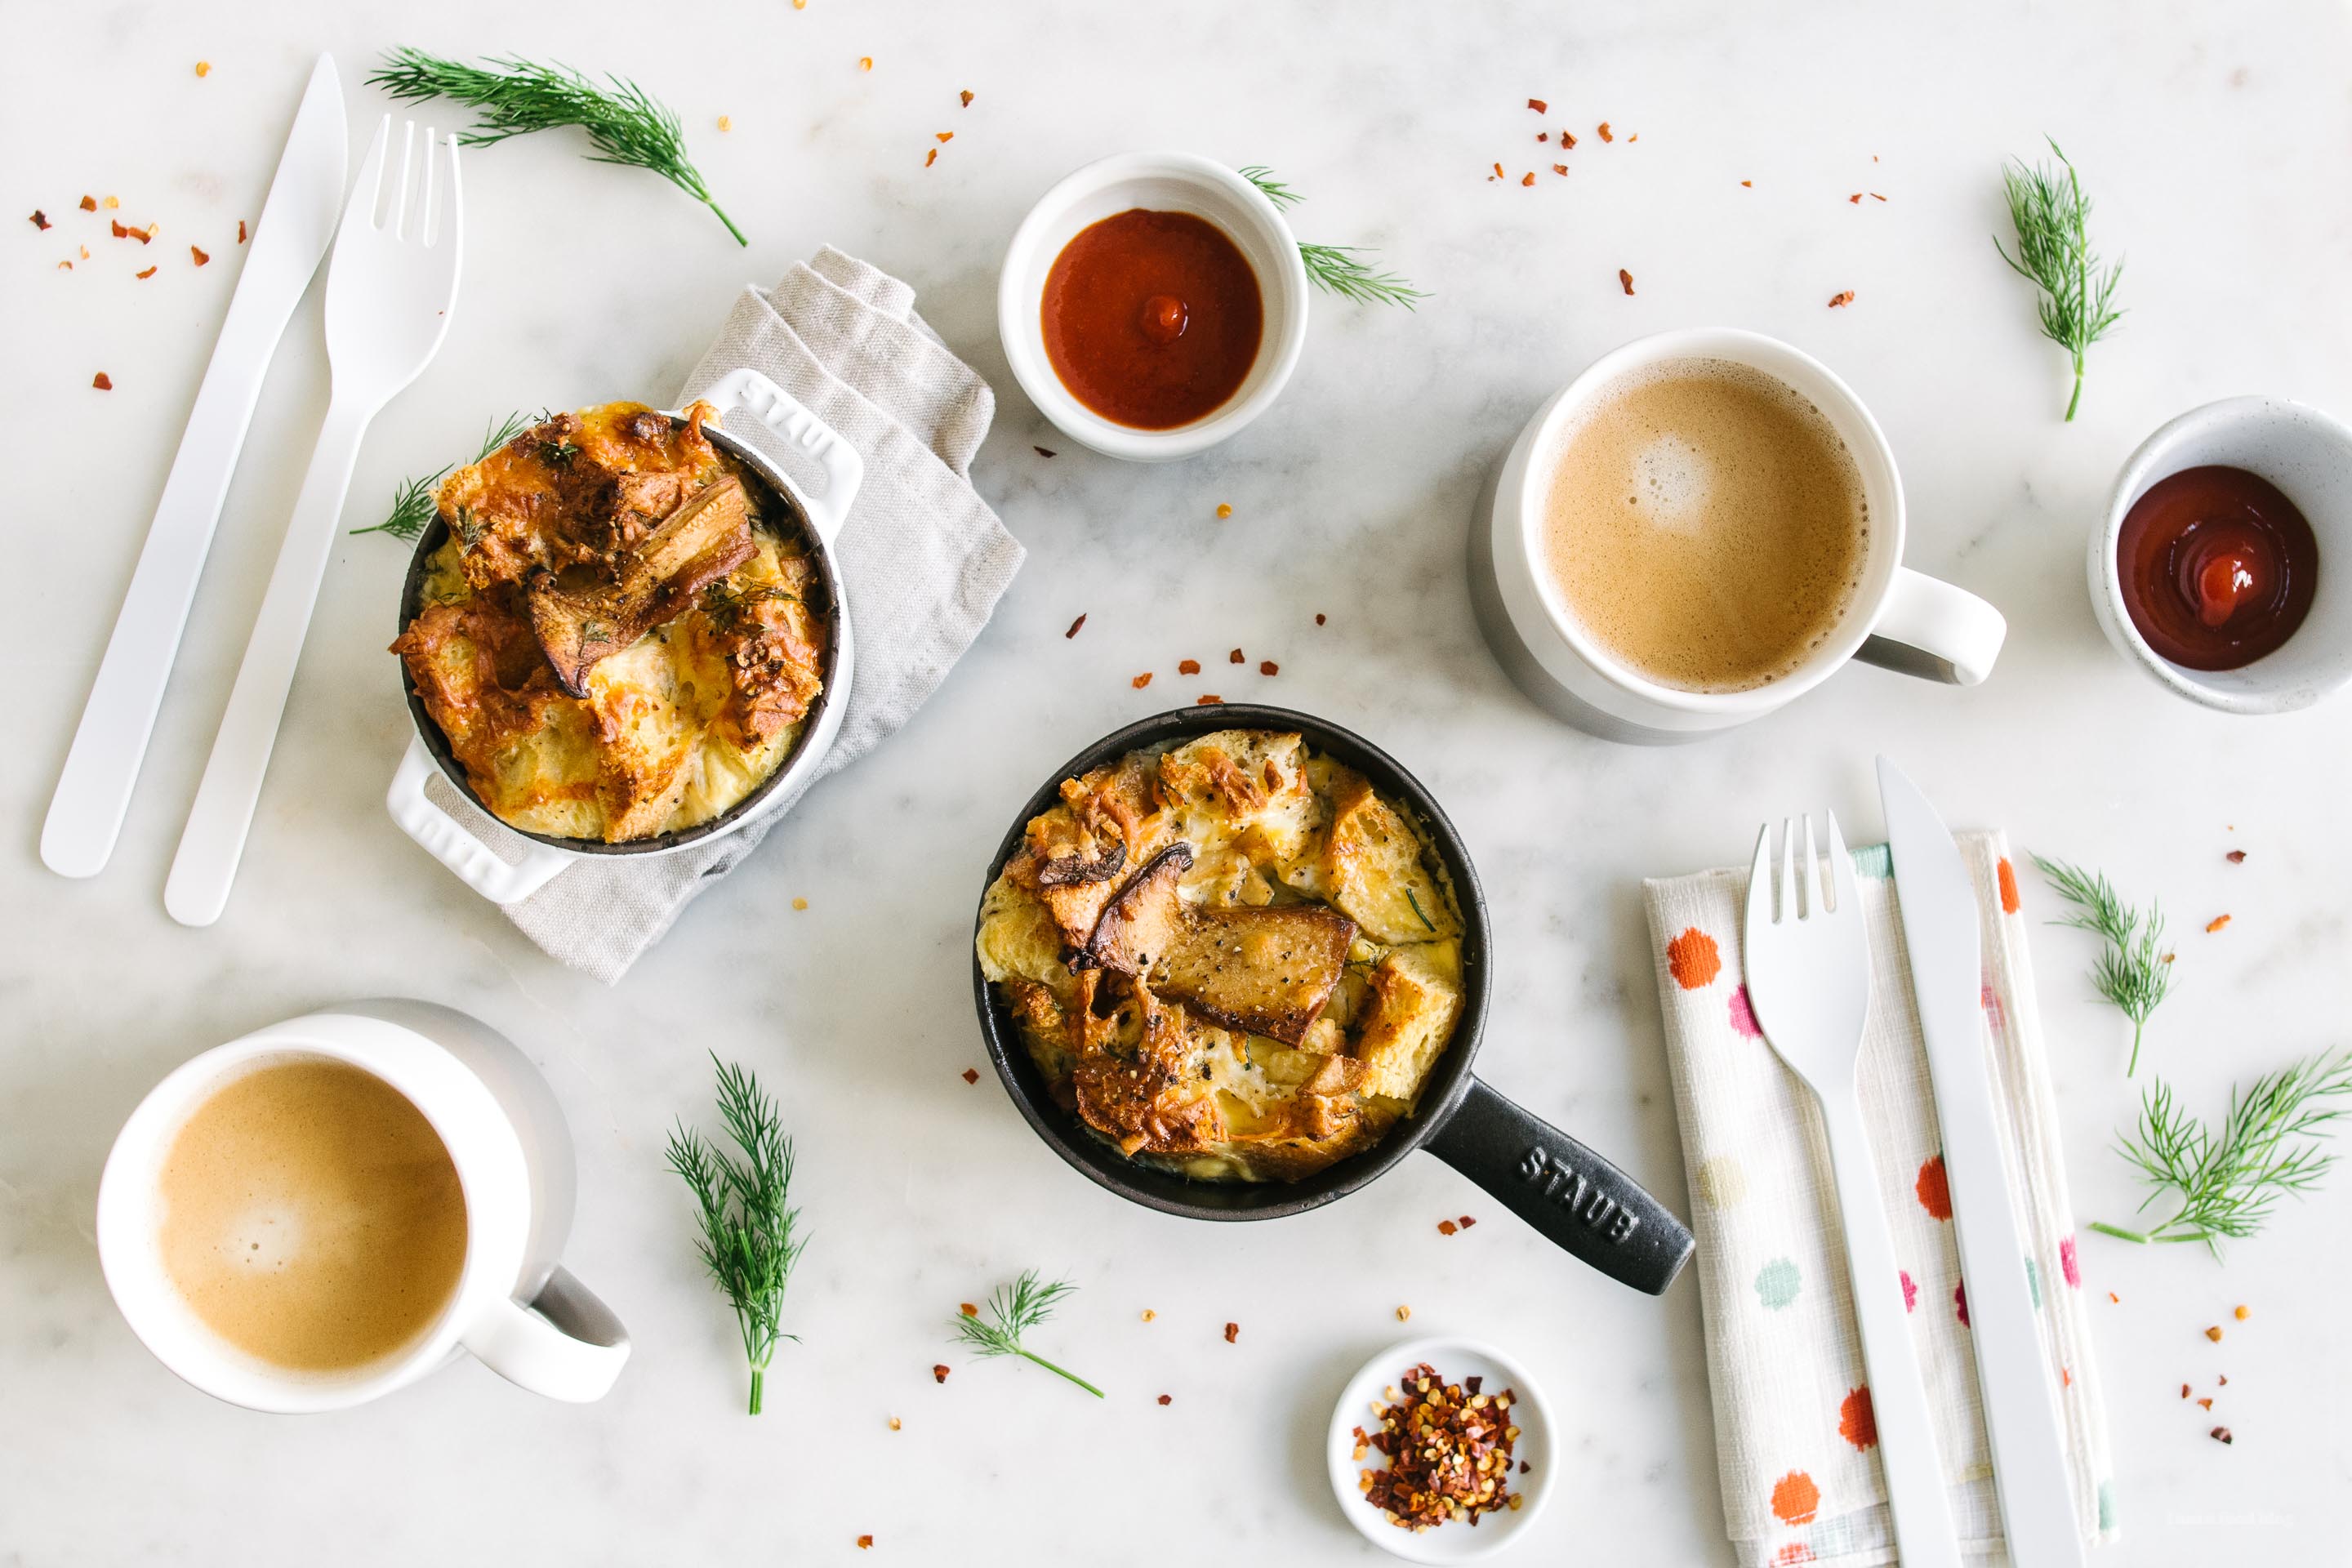 Sunday Brunch: How to Make Breakfast Strata without a Recipe